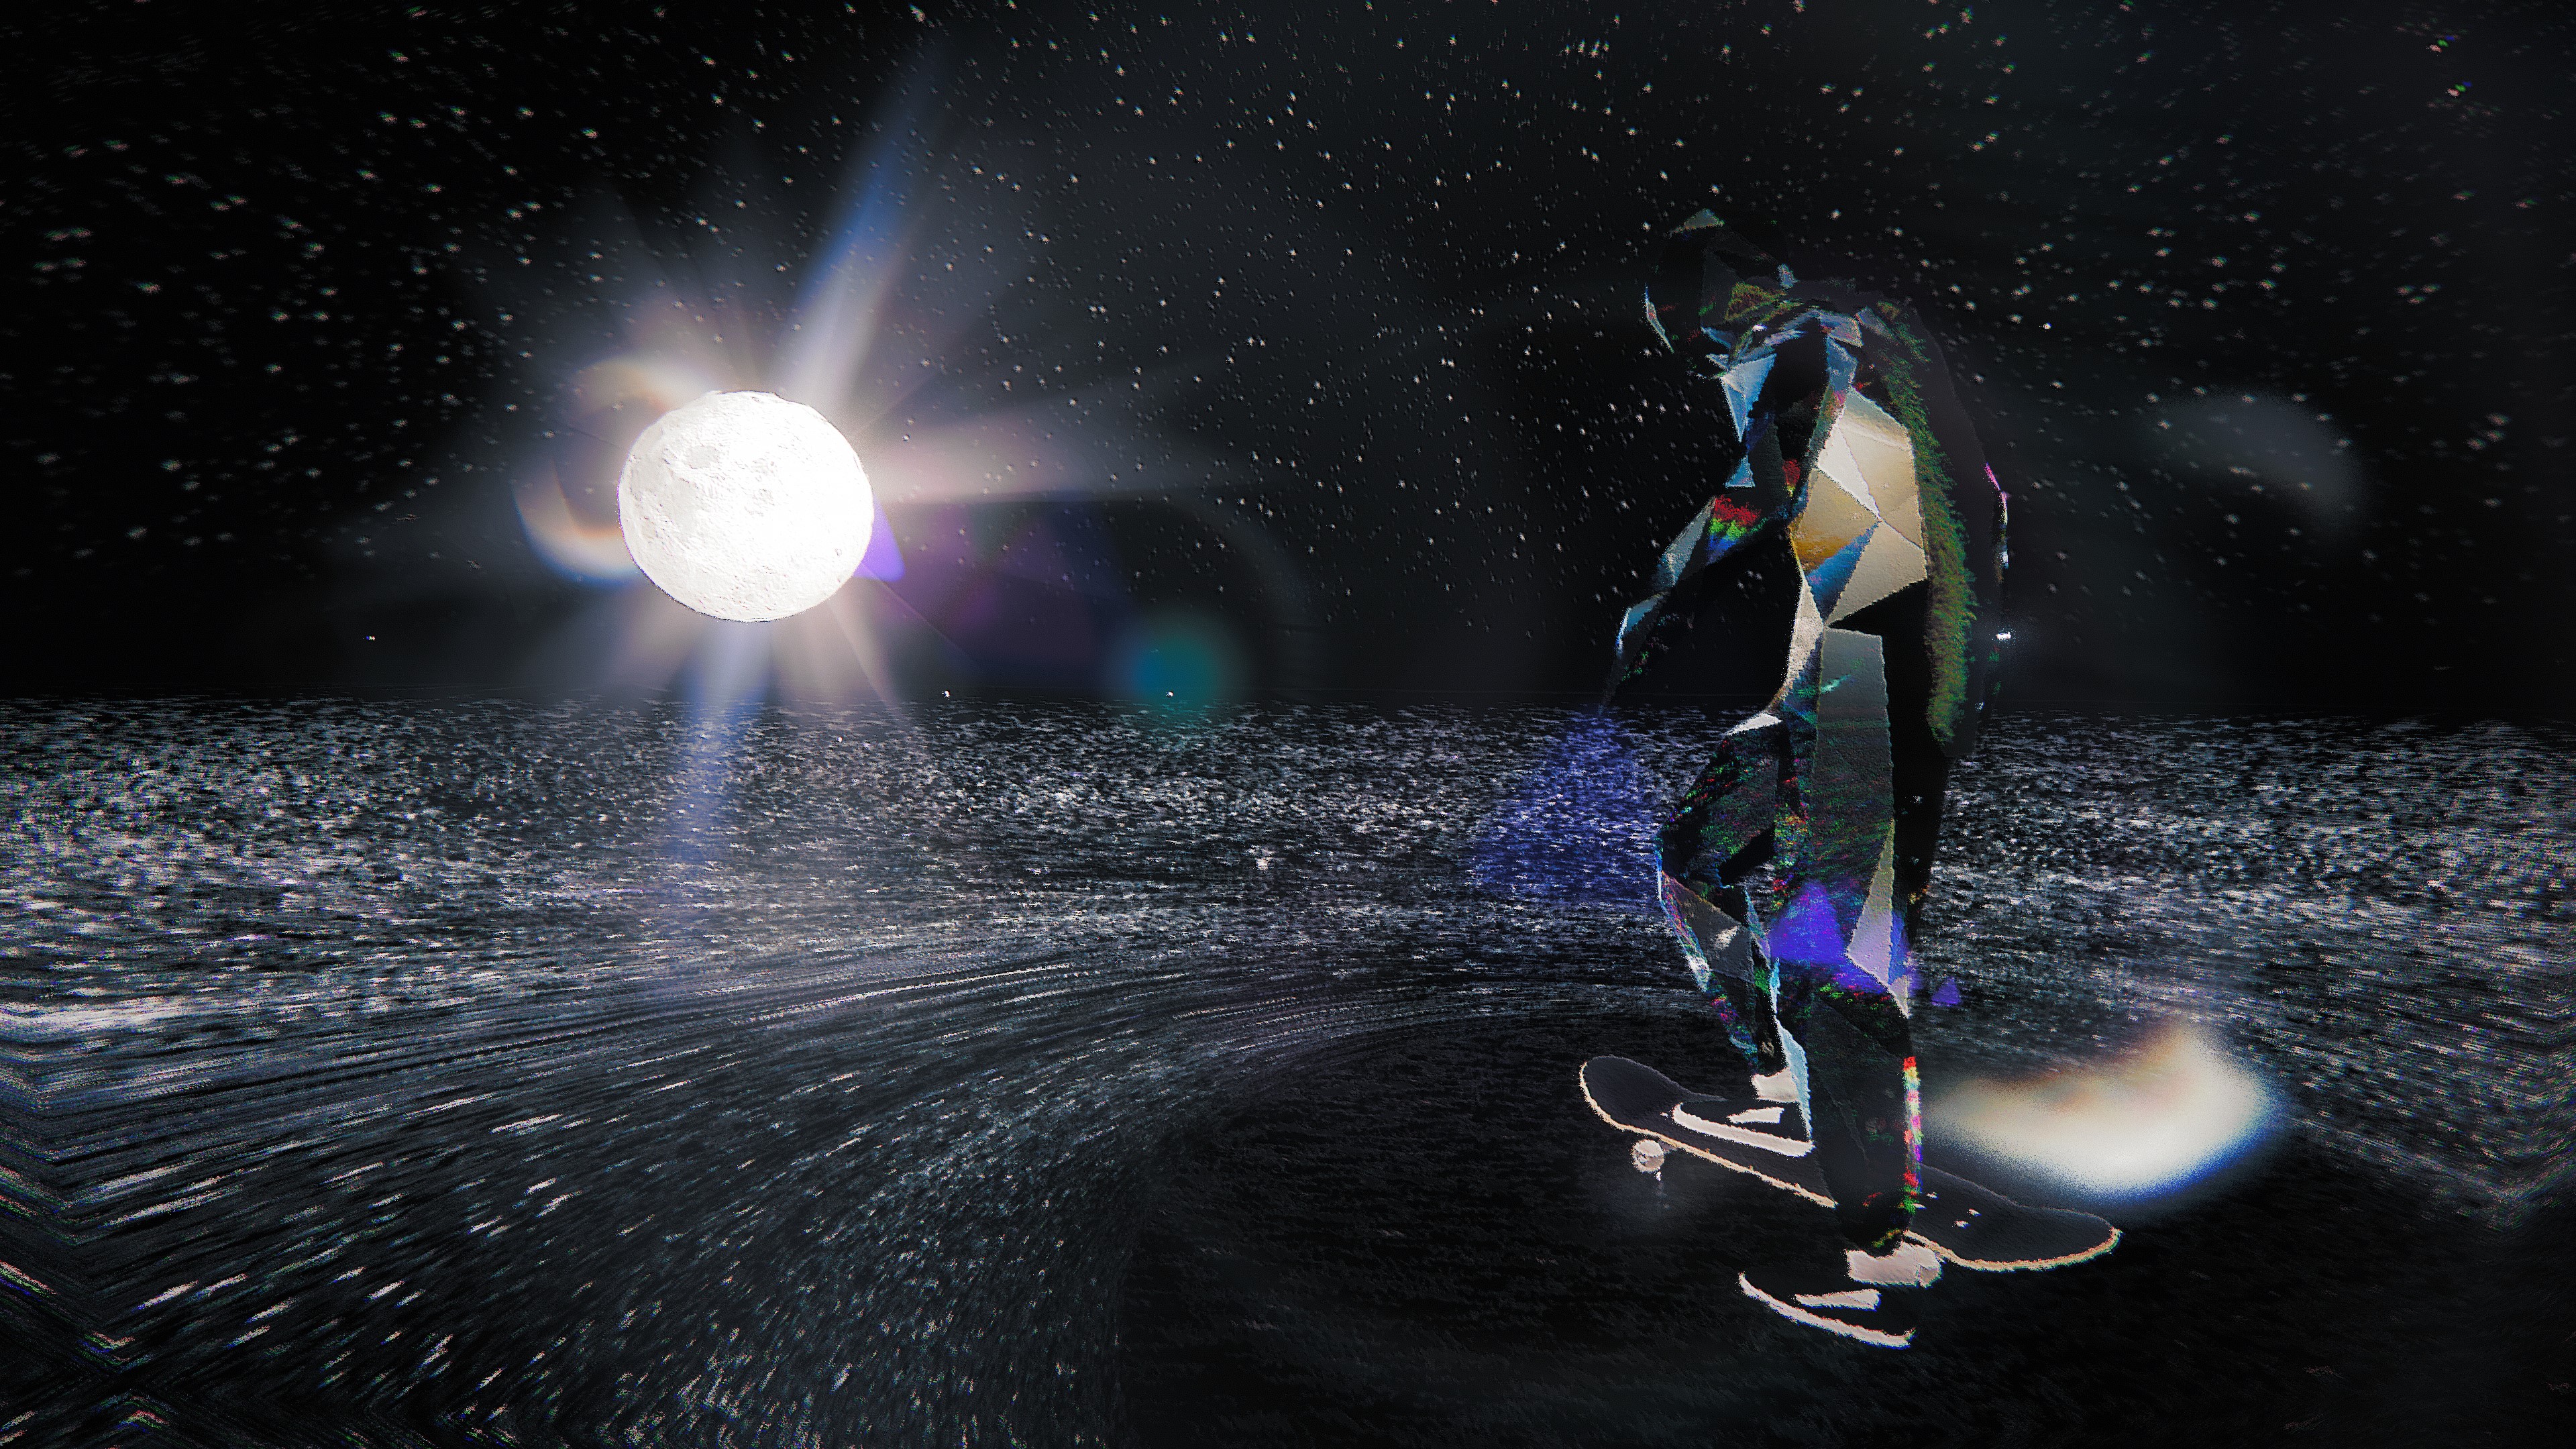 Facing down the Moon in Skate Story.